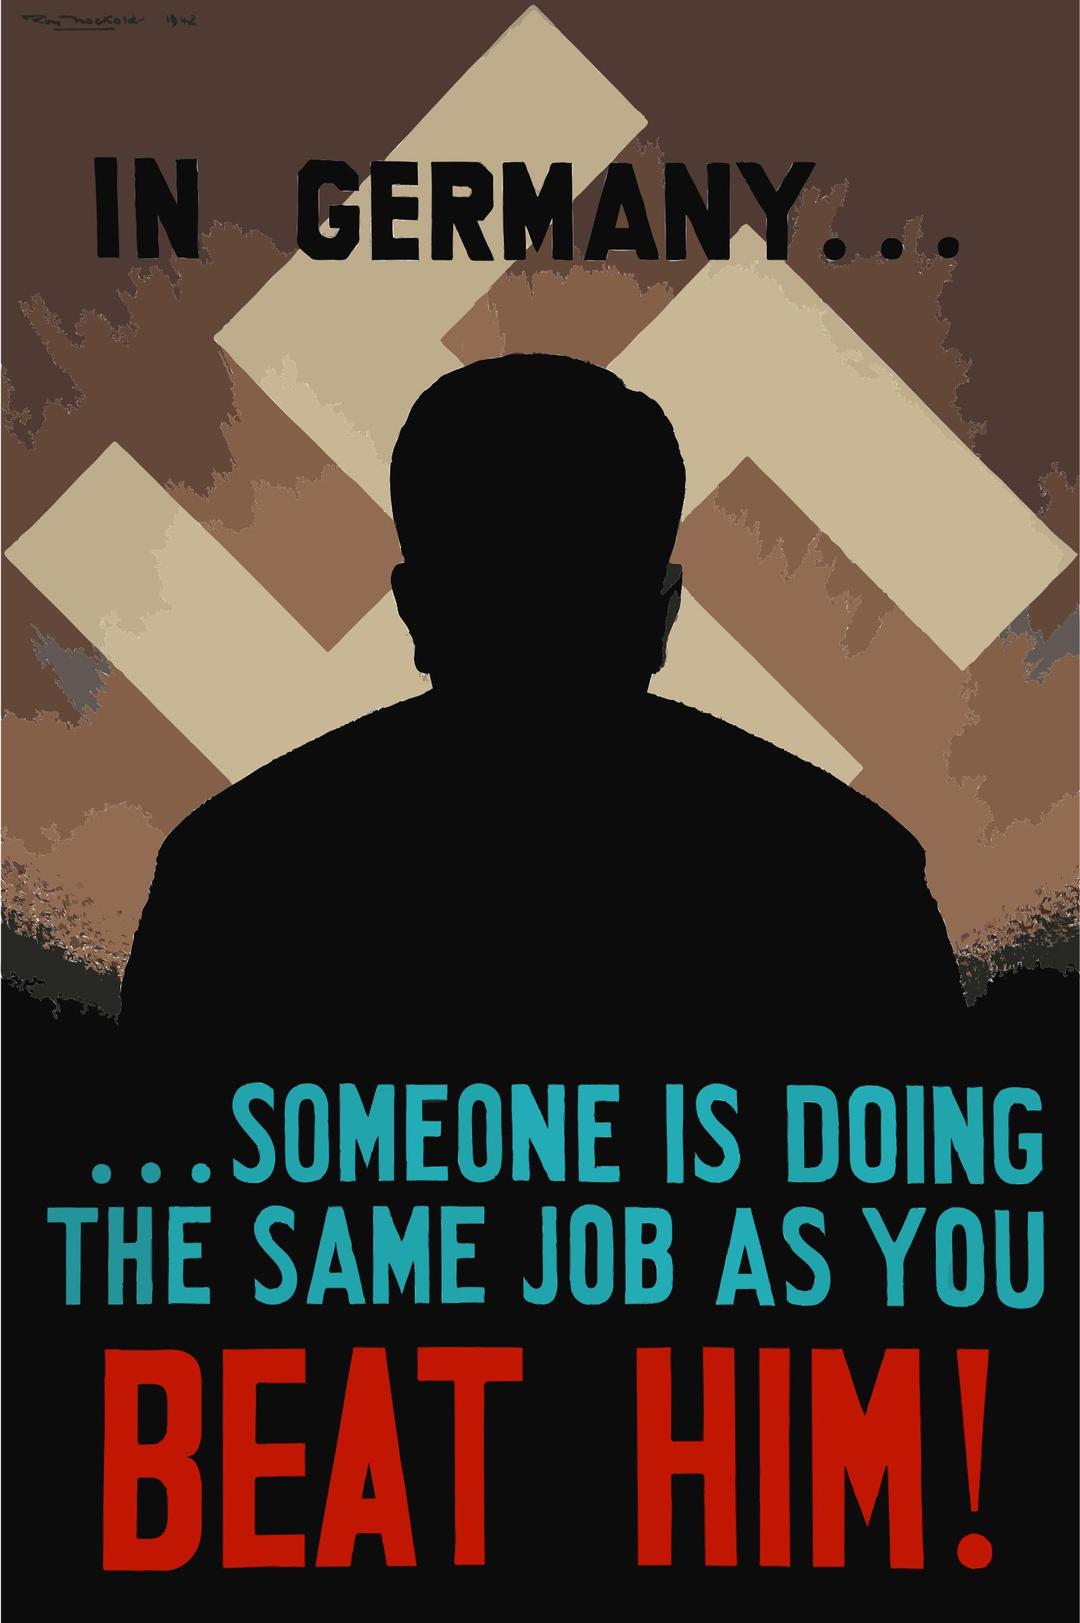 INF3-126 War Effort In Germany... someone is doing the same job as you - Beat him! edit png transparent